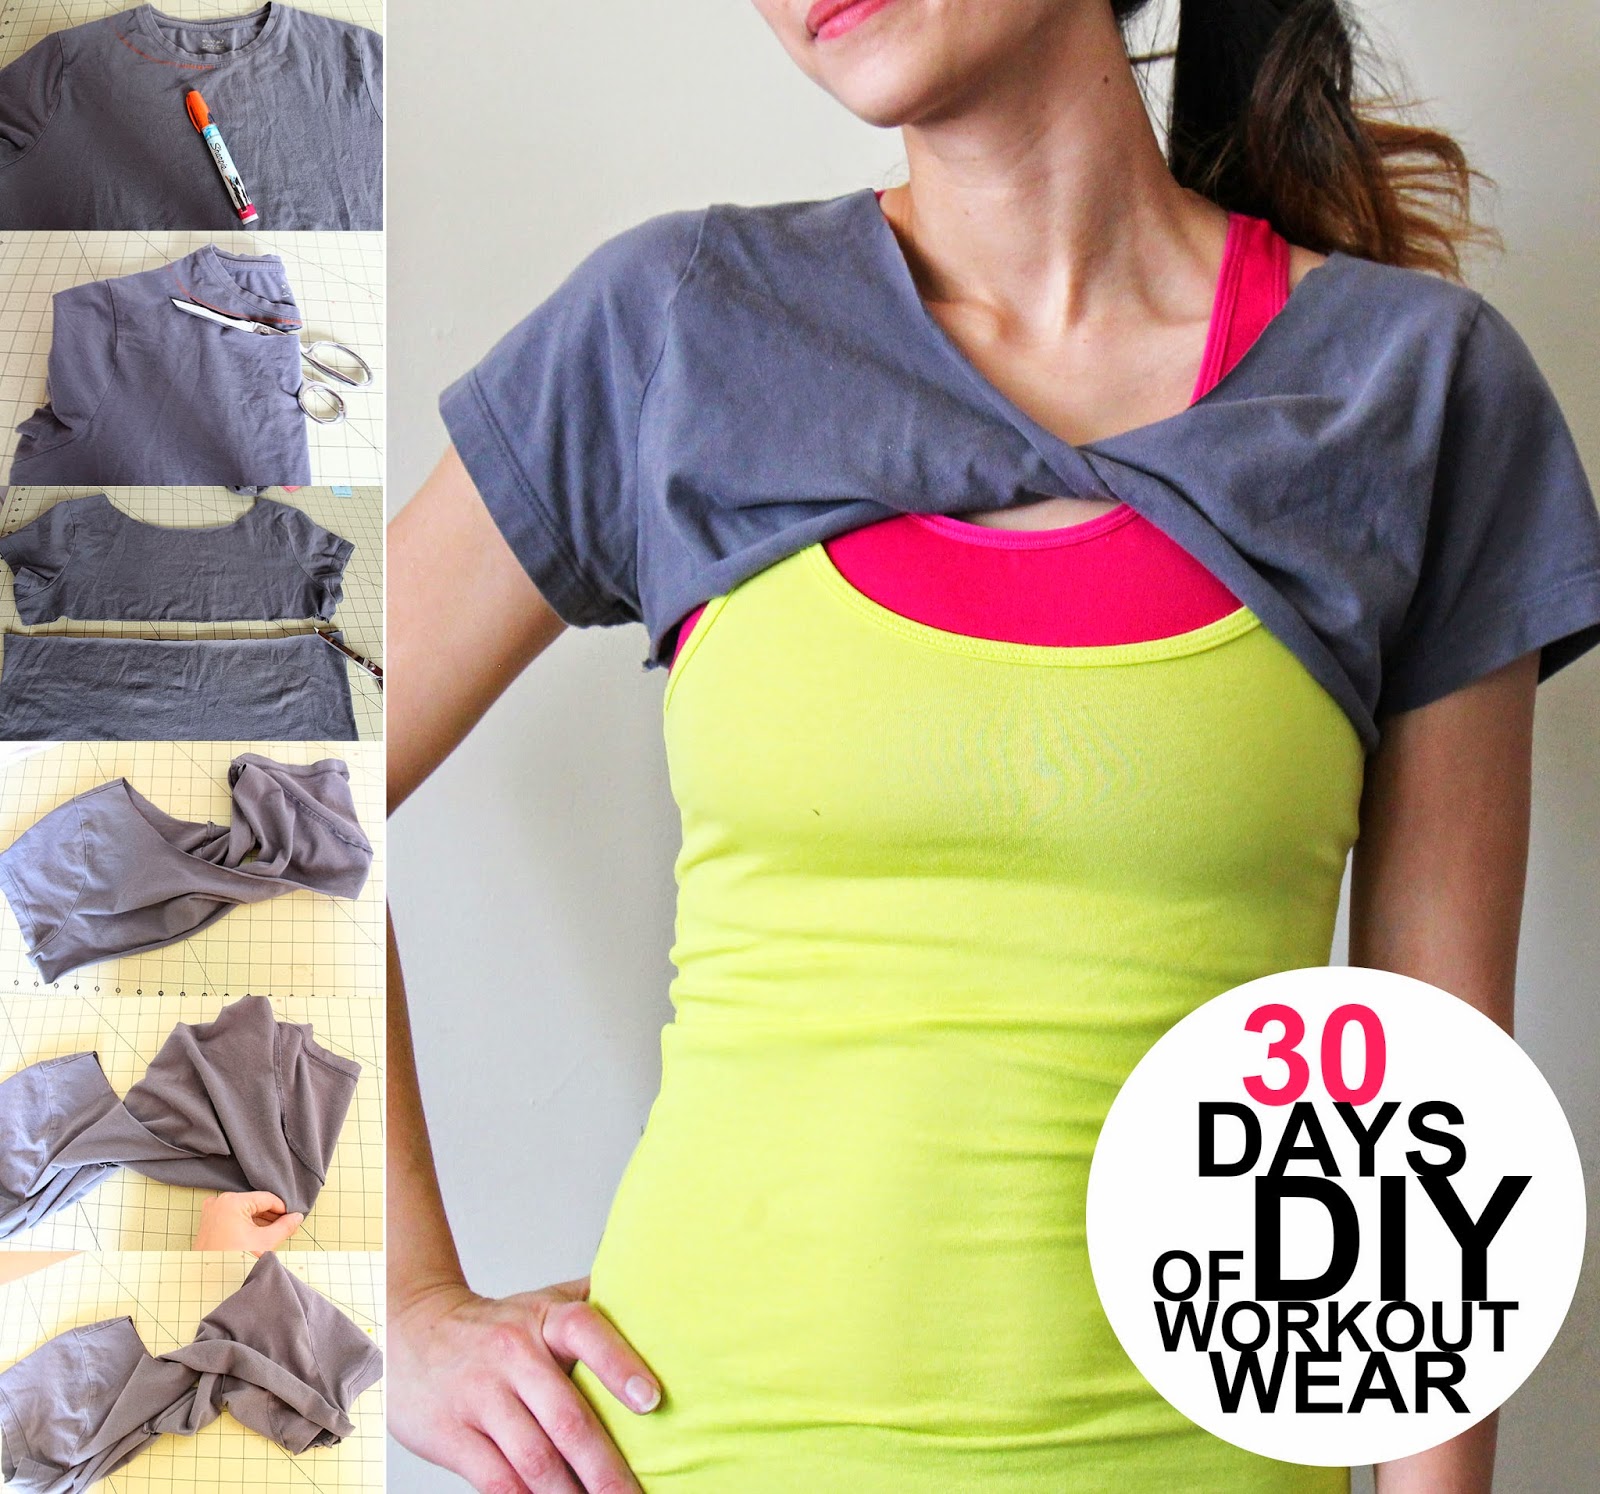 30 Minute Diy Workout Clothes with Comfort Workout Clothes